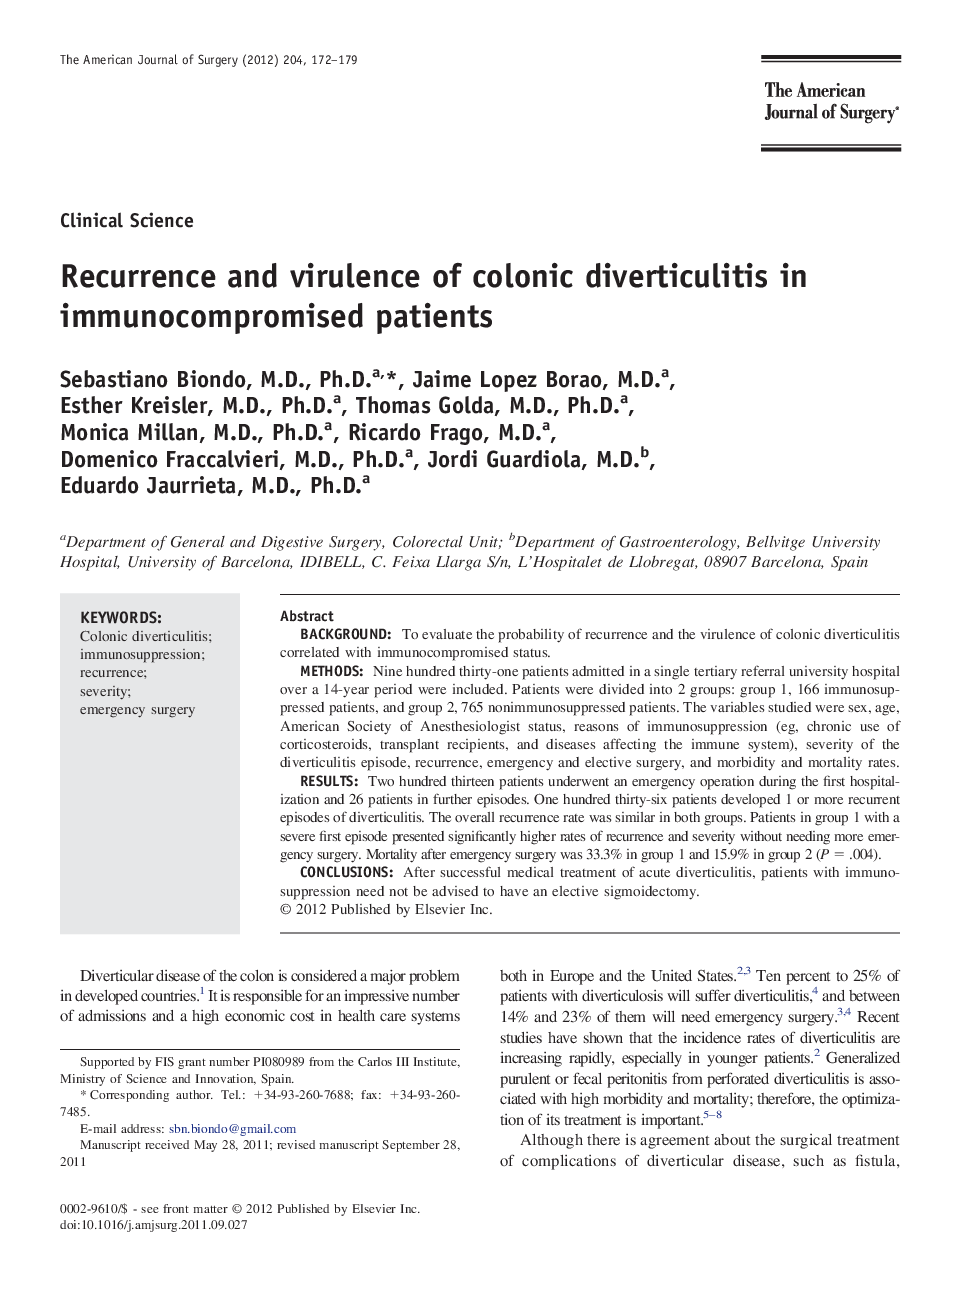 Recurrence and virulence of colonic diverticulitis in immunocompromised patients 